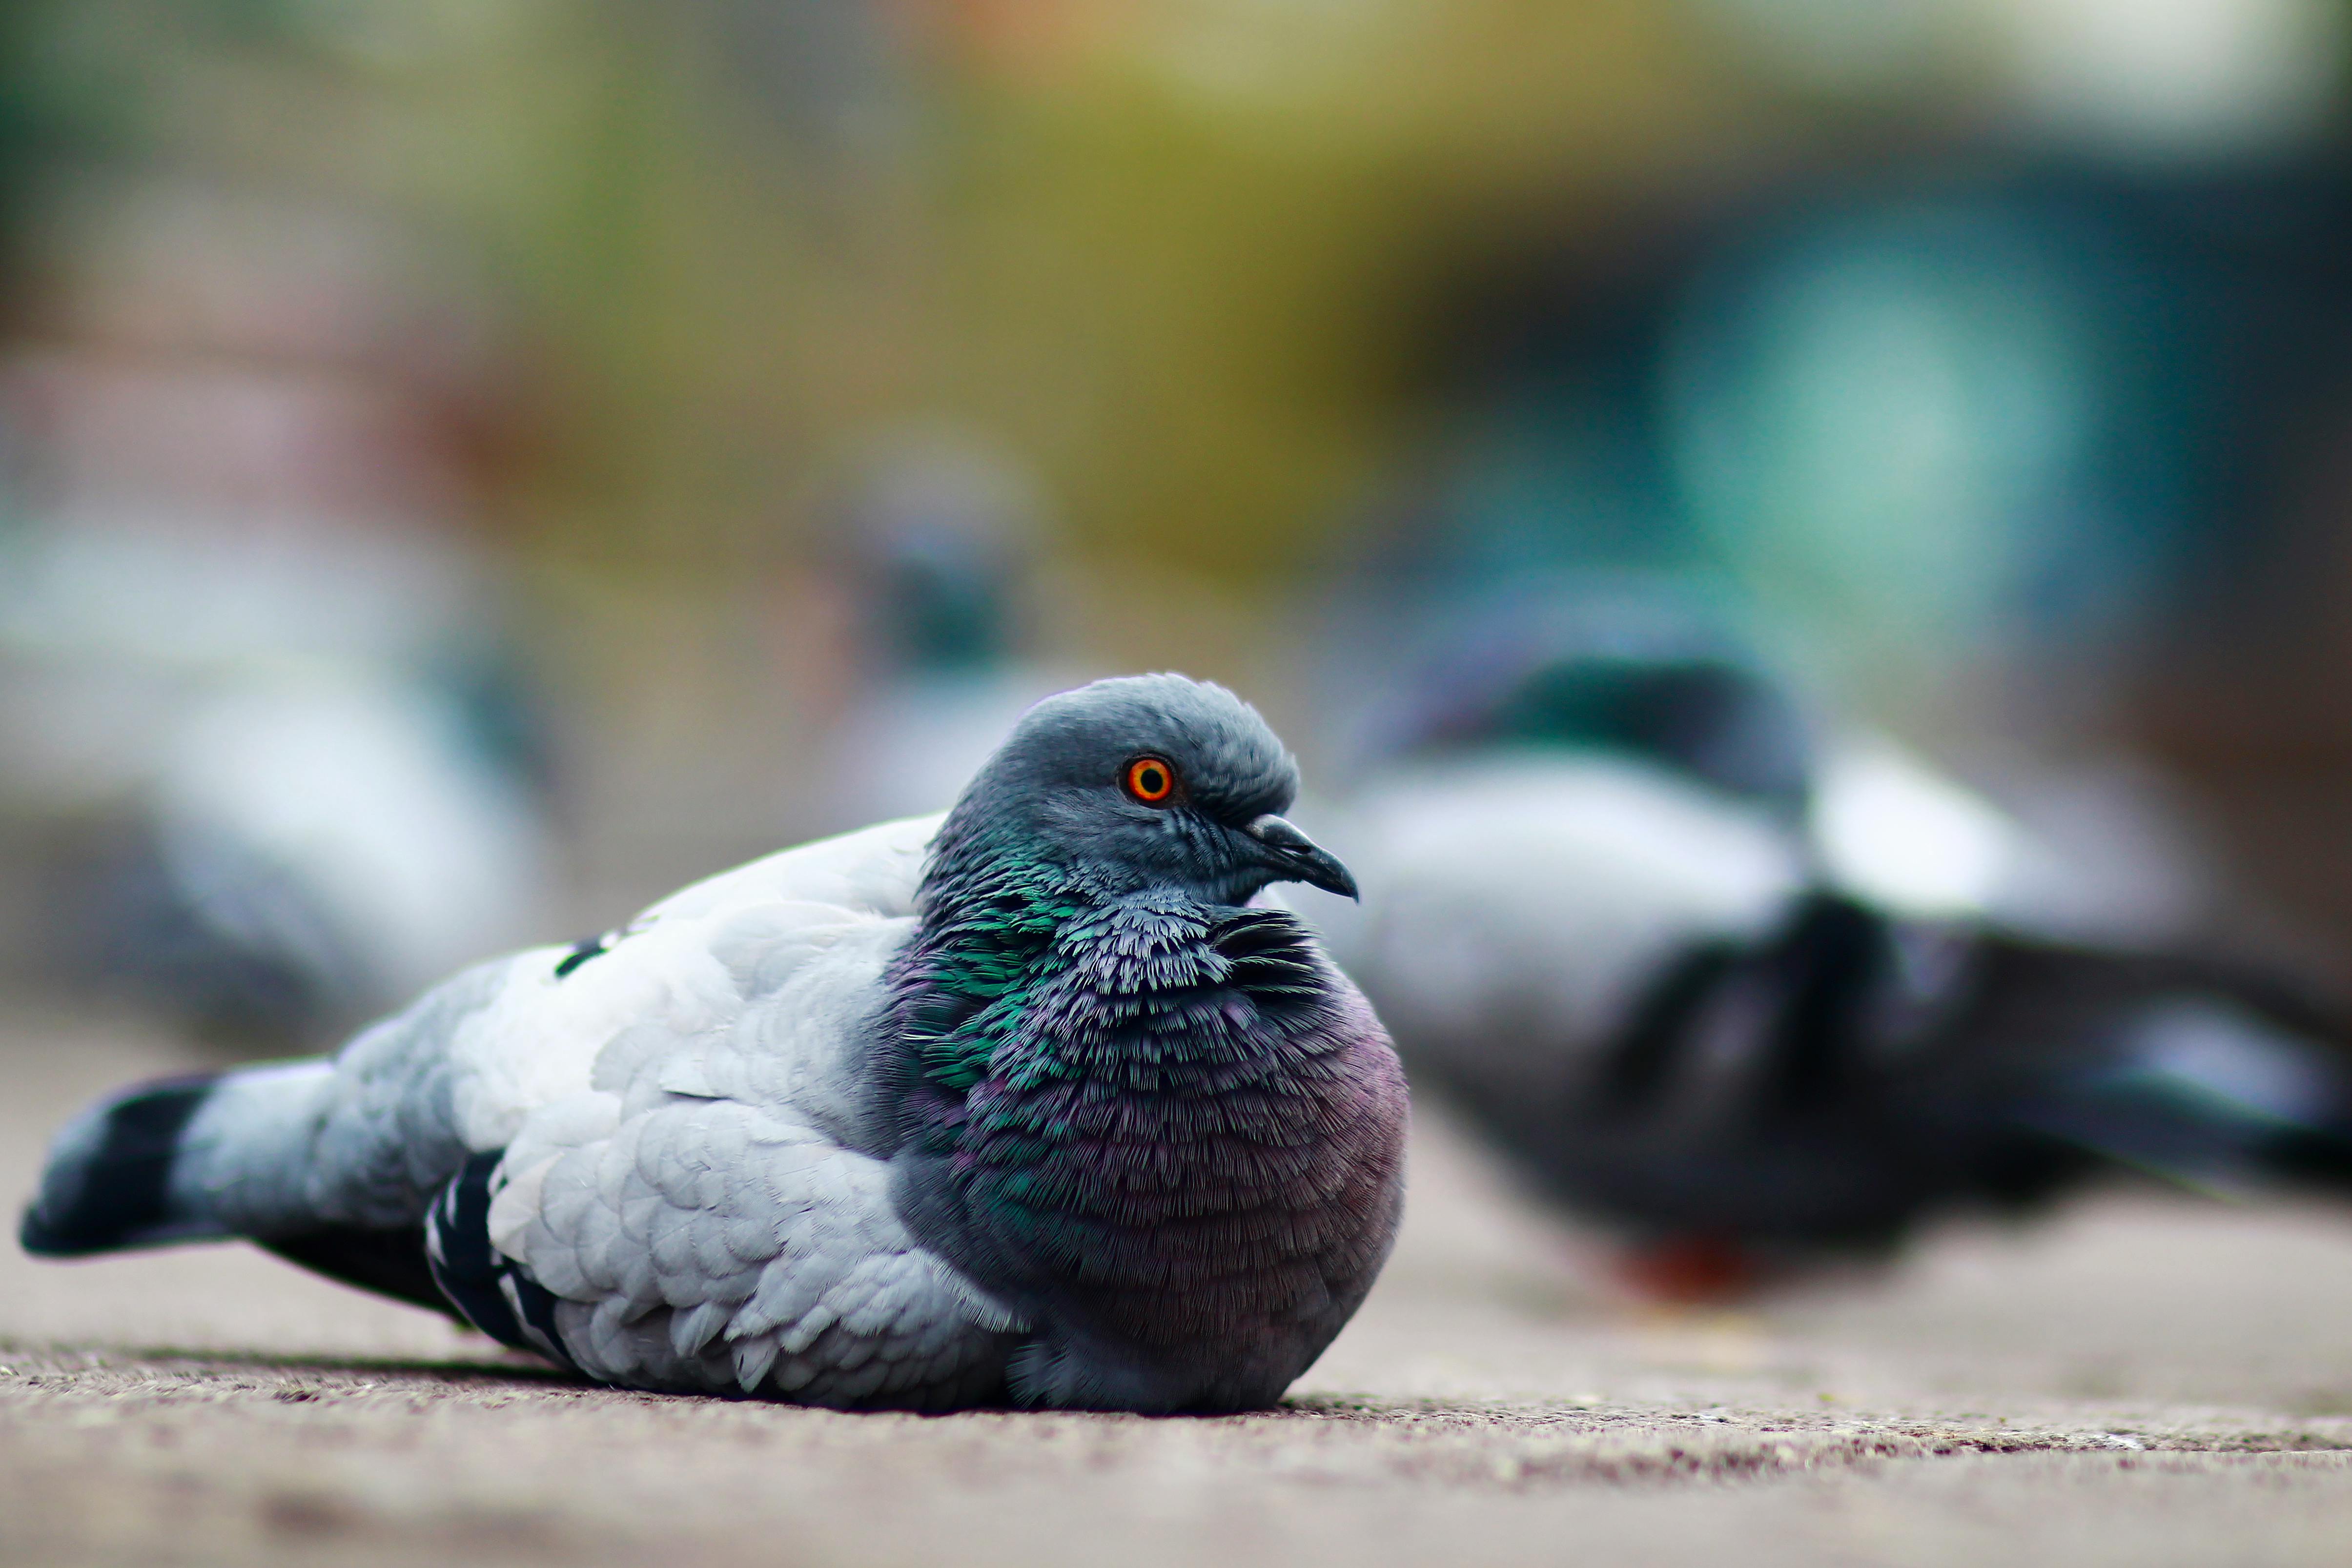 Close-Up Shot of a Feral Pigeon on Concrete Surface · Free Stock Photo